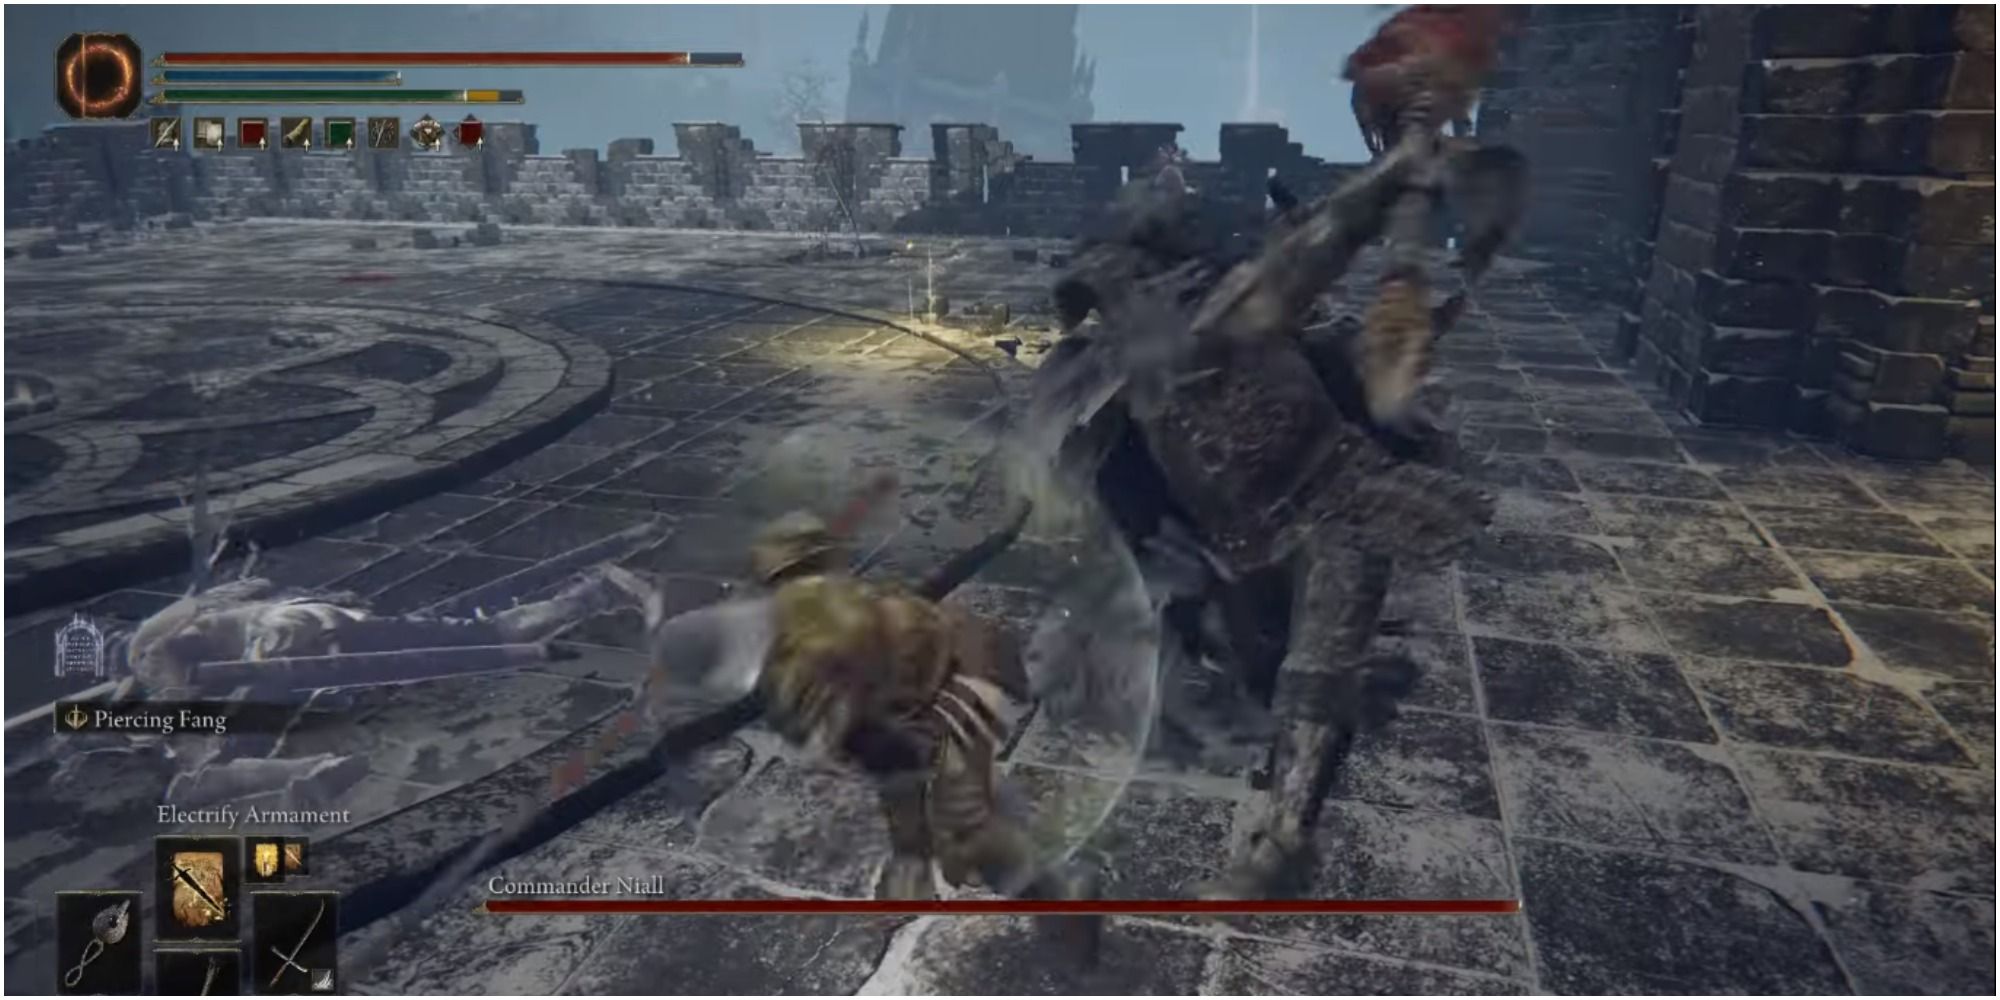 The boss doing Halberd attacks at the player. 